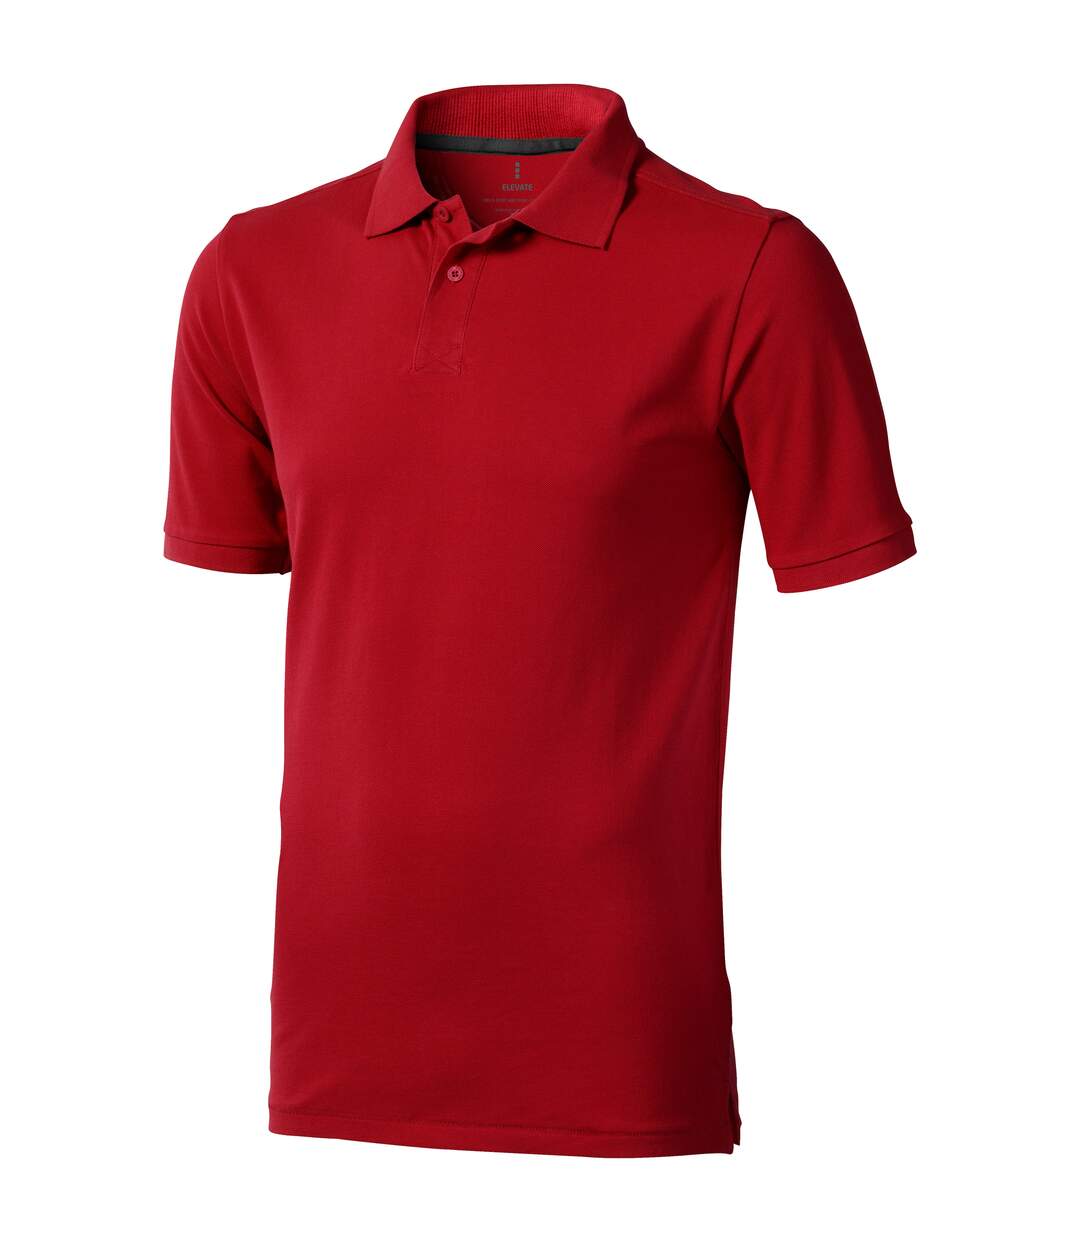 Elevate - Lot de 2 polos manches courtes CALGARY - Homme (Rouge) - UTPF2498